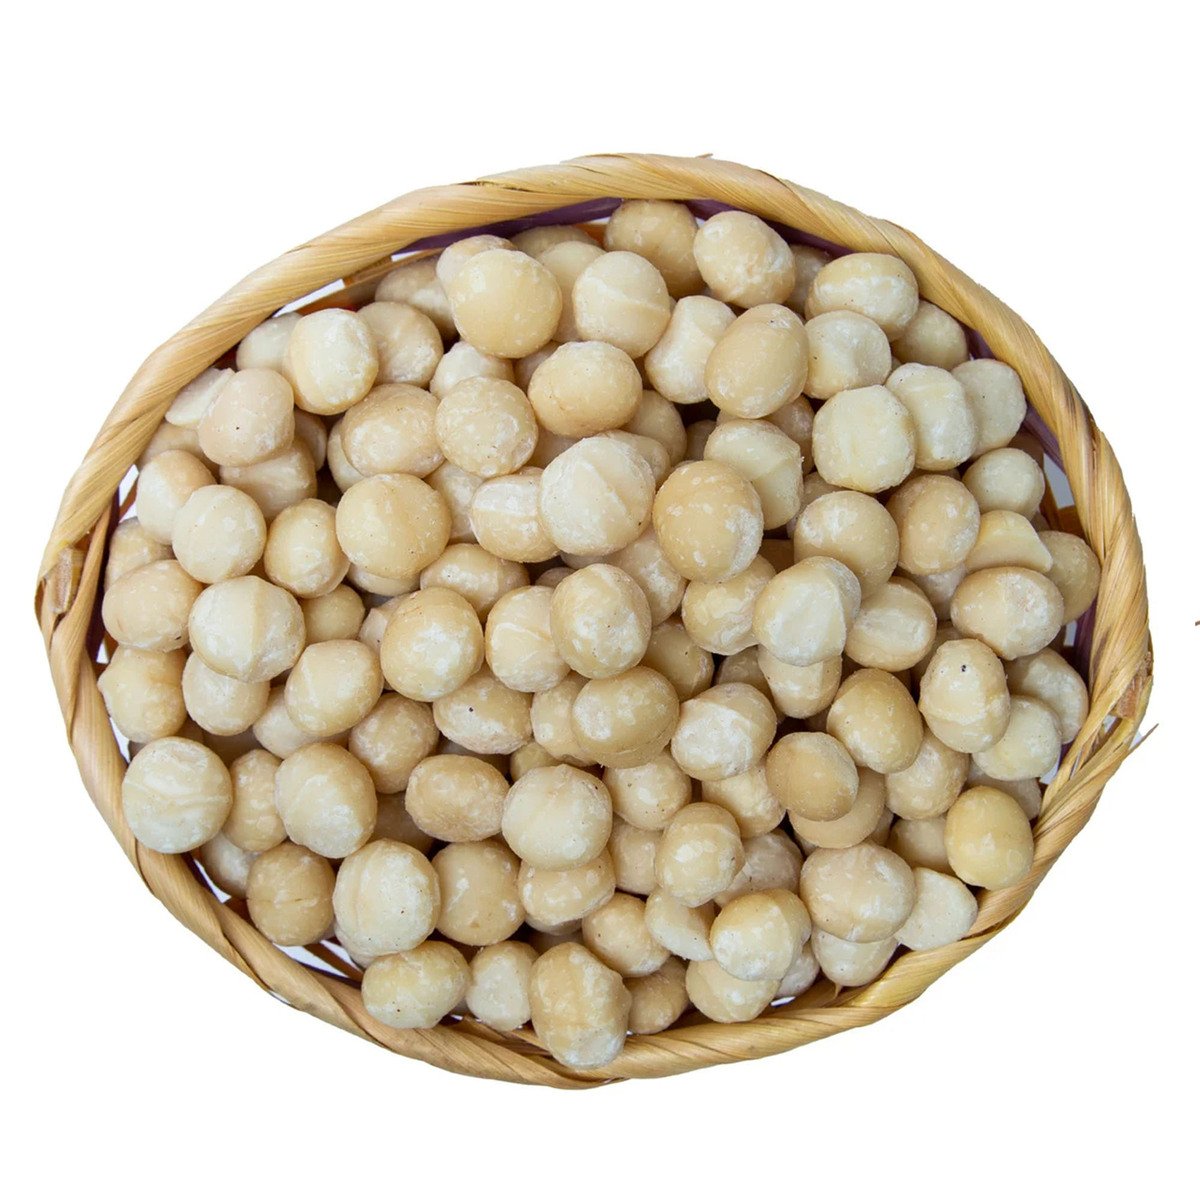 Buy Green & Gold Macadamia Nuts (Style 1) 250 g Online at Best Price | Roastery Nuts | Lulu Kuwait in Kuwait